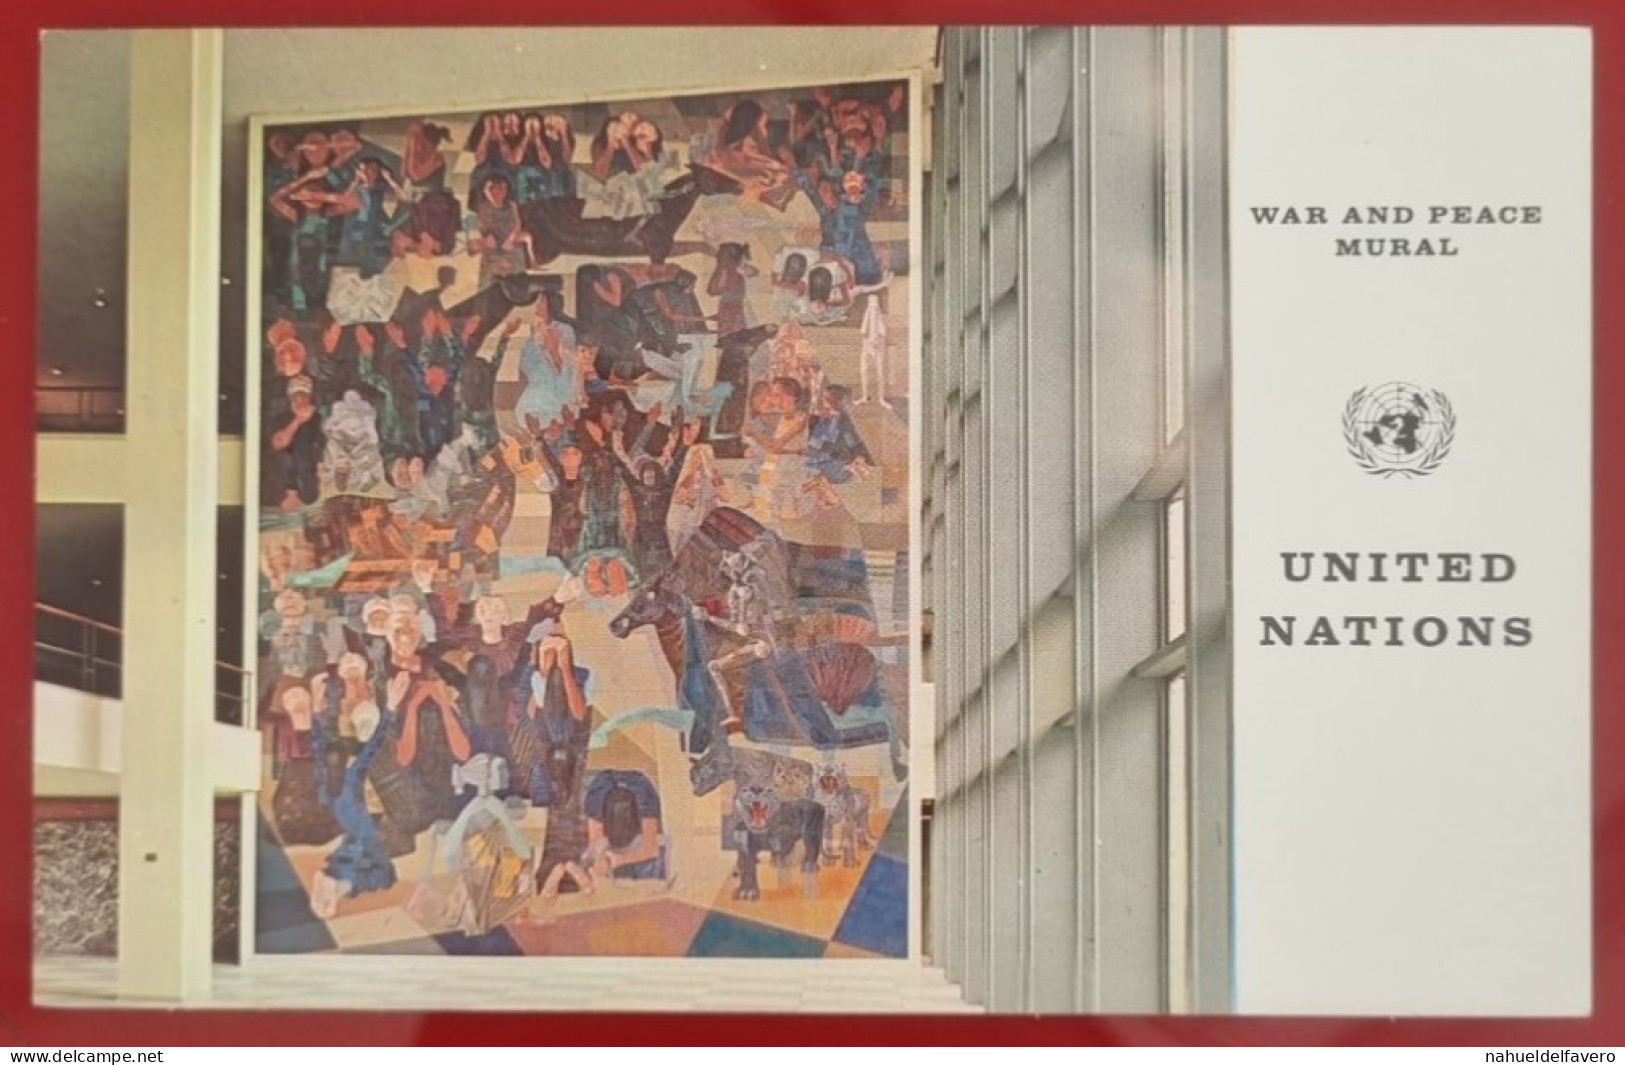 Uncirculated Postcard - USA - NY, NEW YORK CITY - UNITED NATIONS, ONE OF THE TWO MURALS, "WAR" AND "PEACE" BY PORTINARI - Plaatsen & Squares